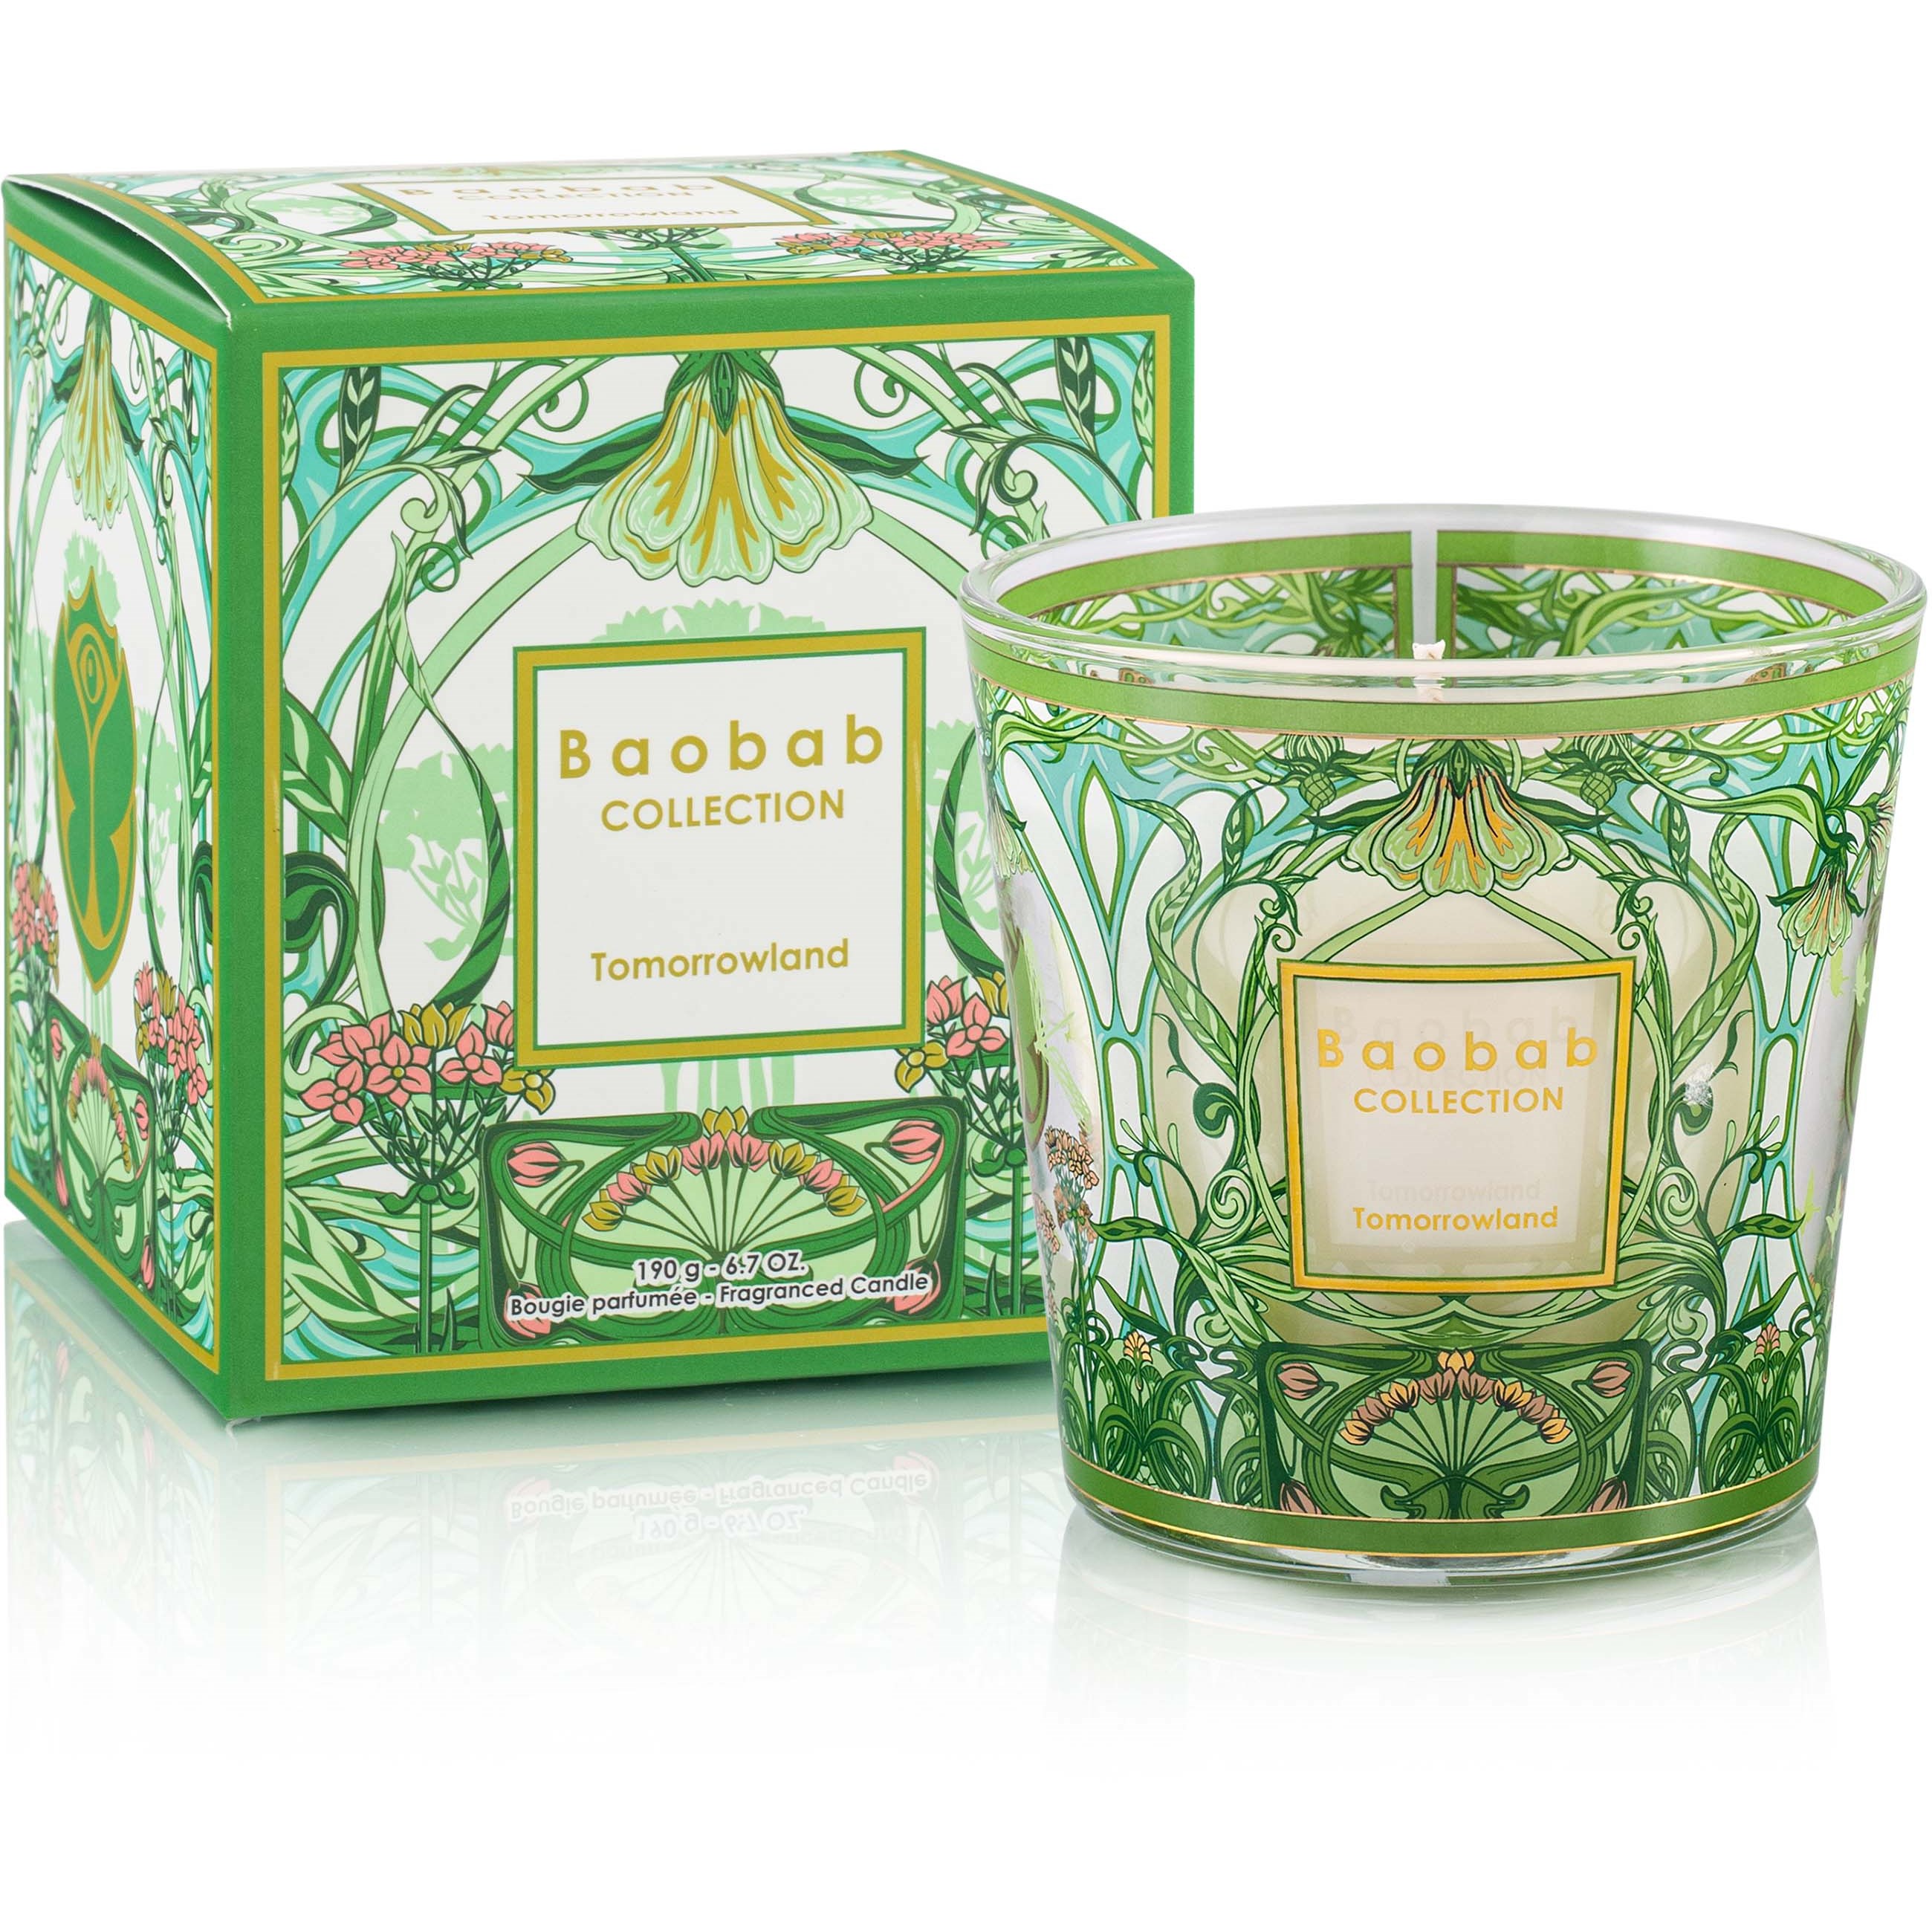 Baobab Collection Tomorrowland My First Baobab Scented Candle 190